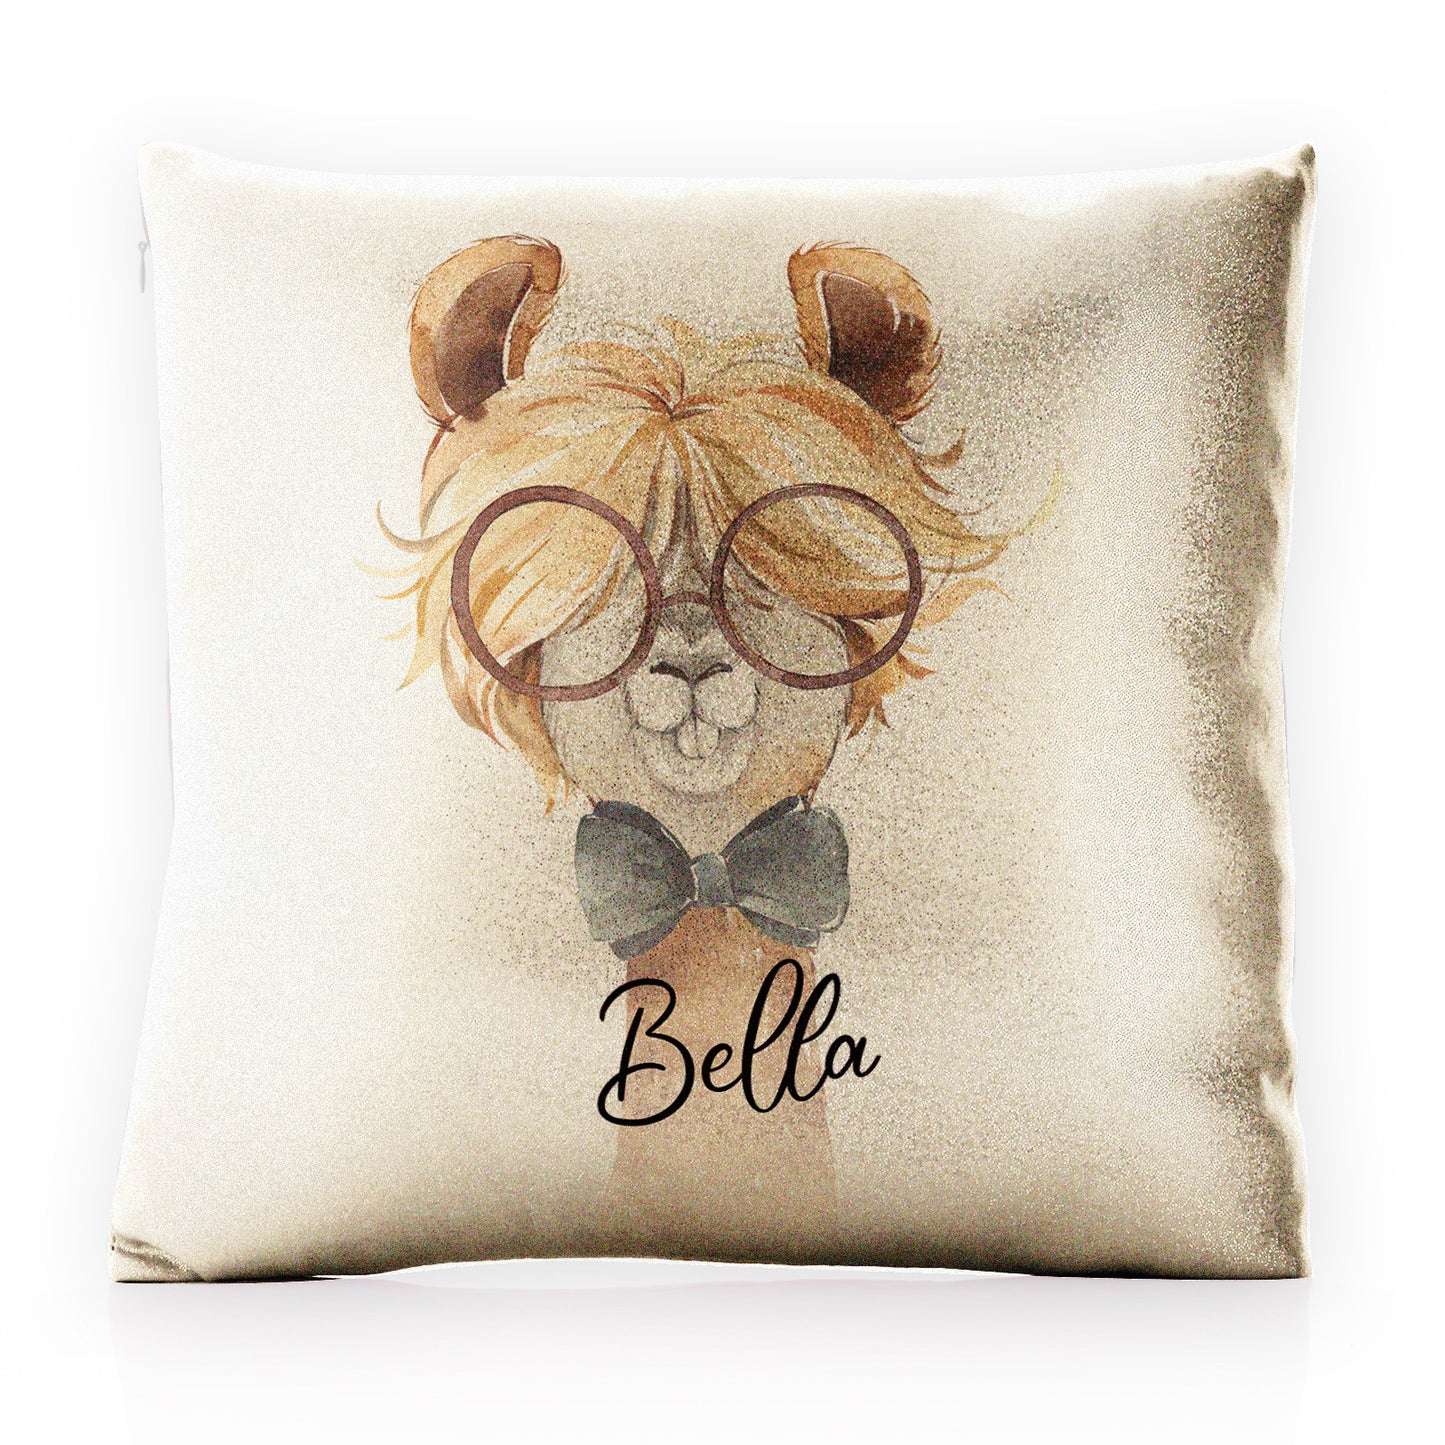 Personalised Glitter Cushion with Alpaca Bow Tie and Glasses and Cute Text